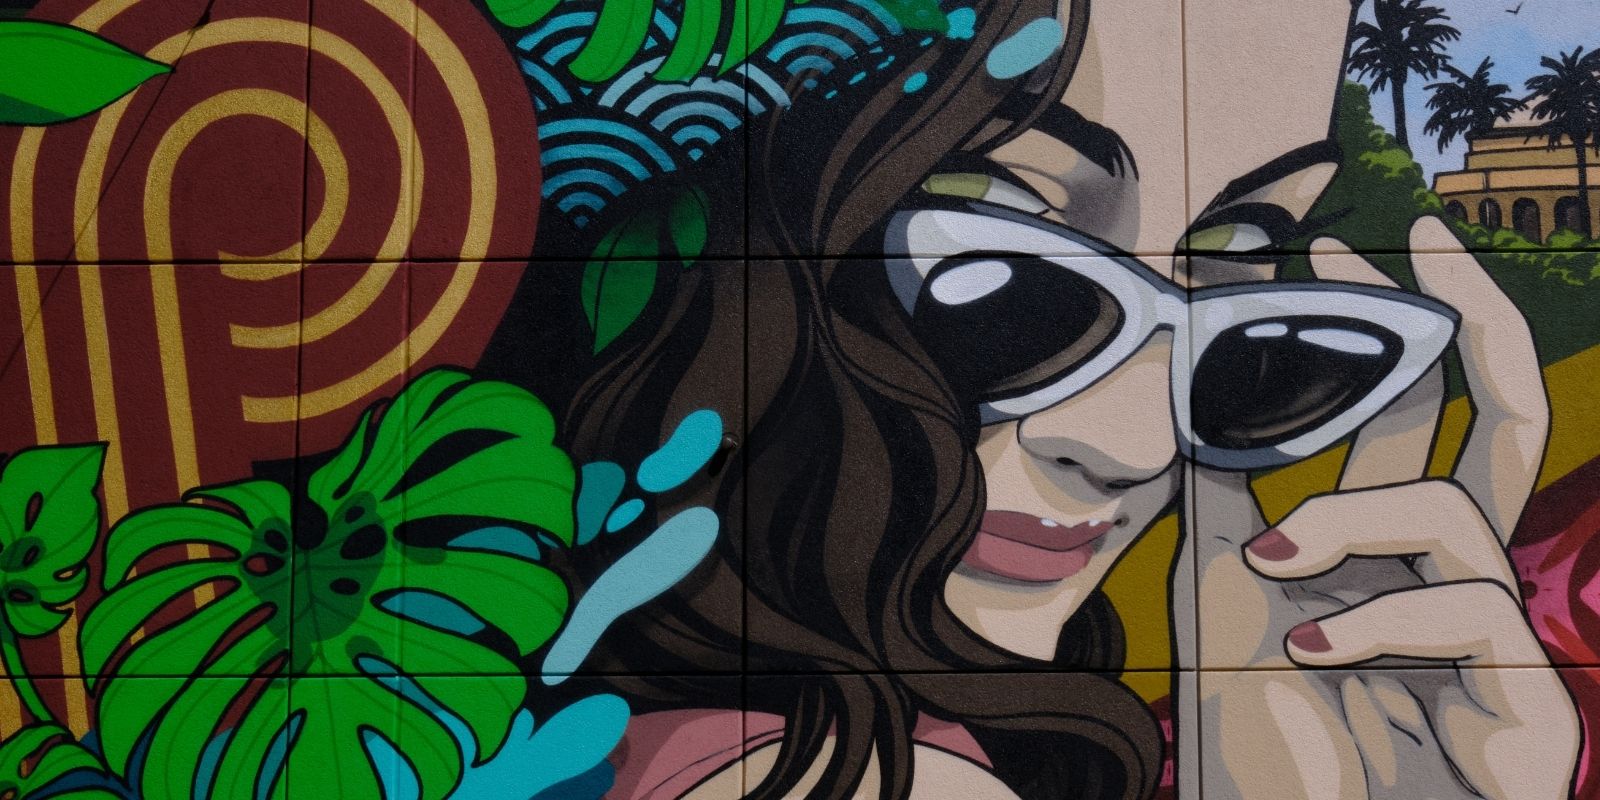 Mural art at the Retro Pool in SAHARA. Includes a woman peeking out above her sunglasses, leaves and the infinity S